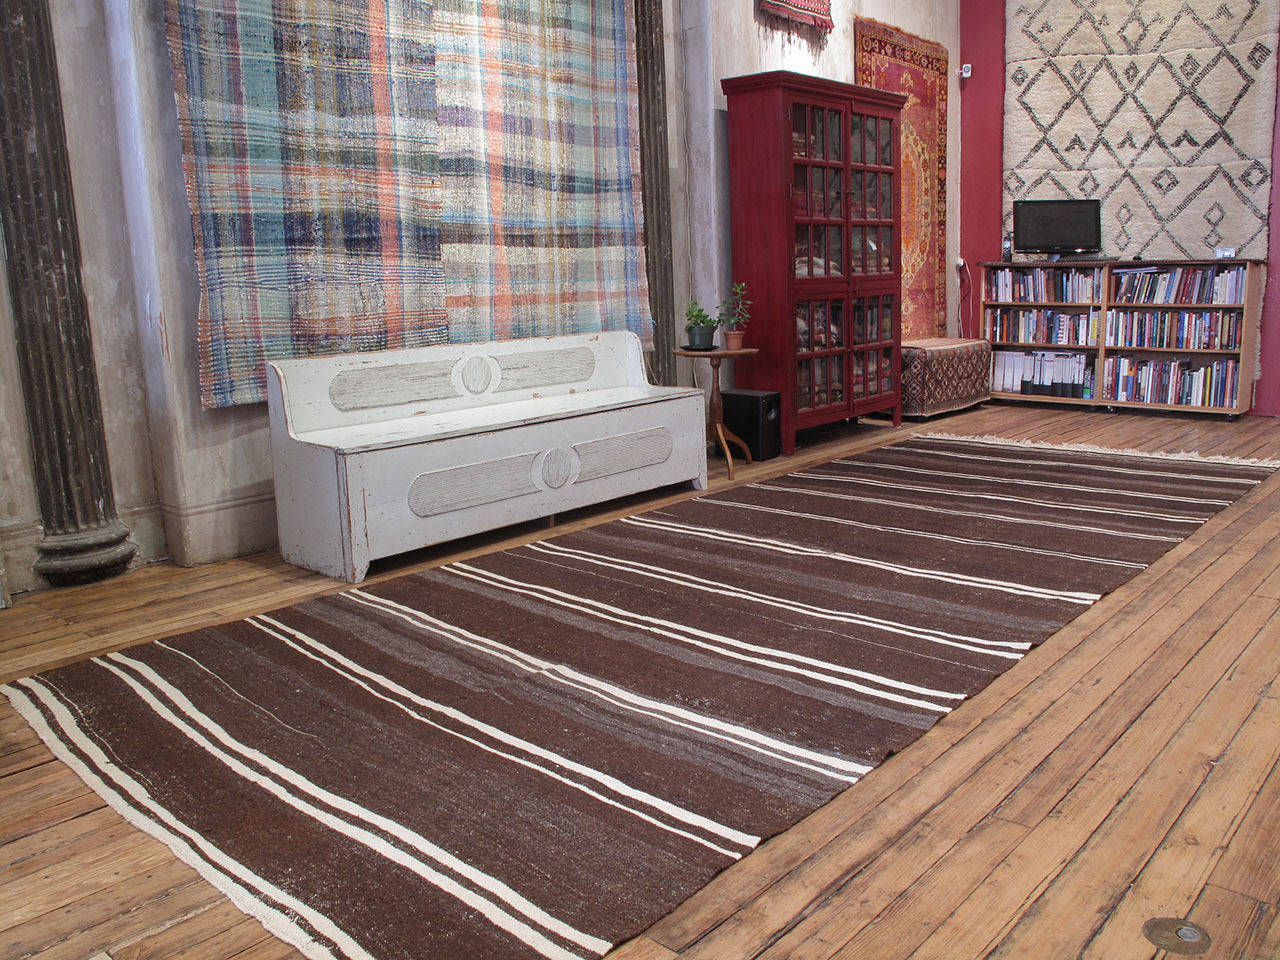 Massive Banded Kilim wide runner rug. A simple old tribal flat-weave runner rug from Central Turkey, woven with natural dark brown wool. A very heavy and sturdy weaving. Unusually large runner.